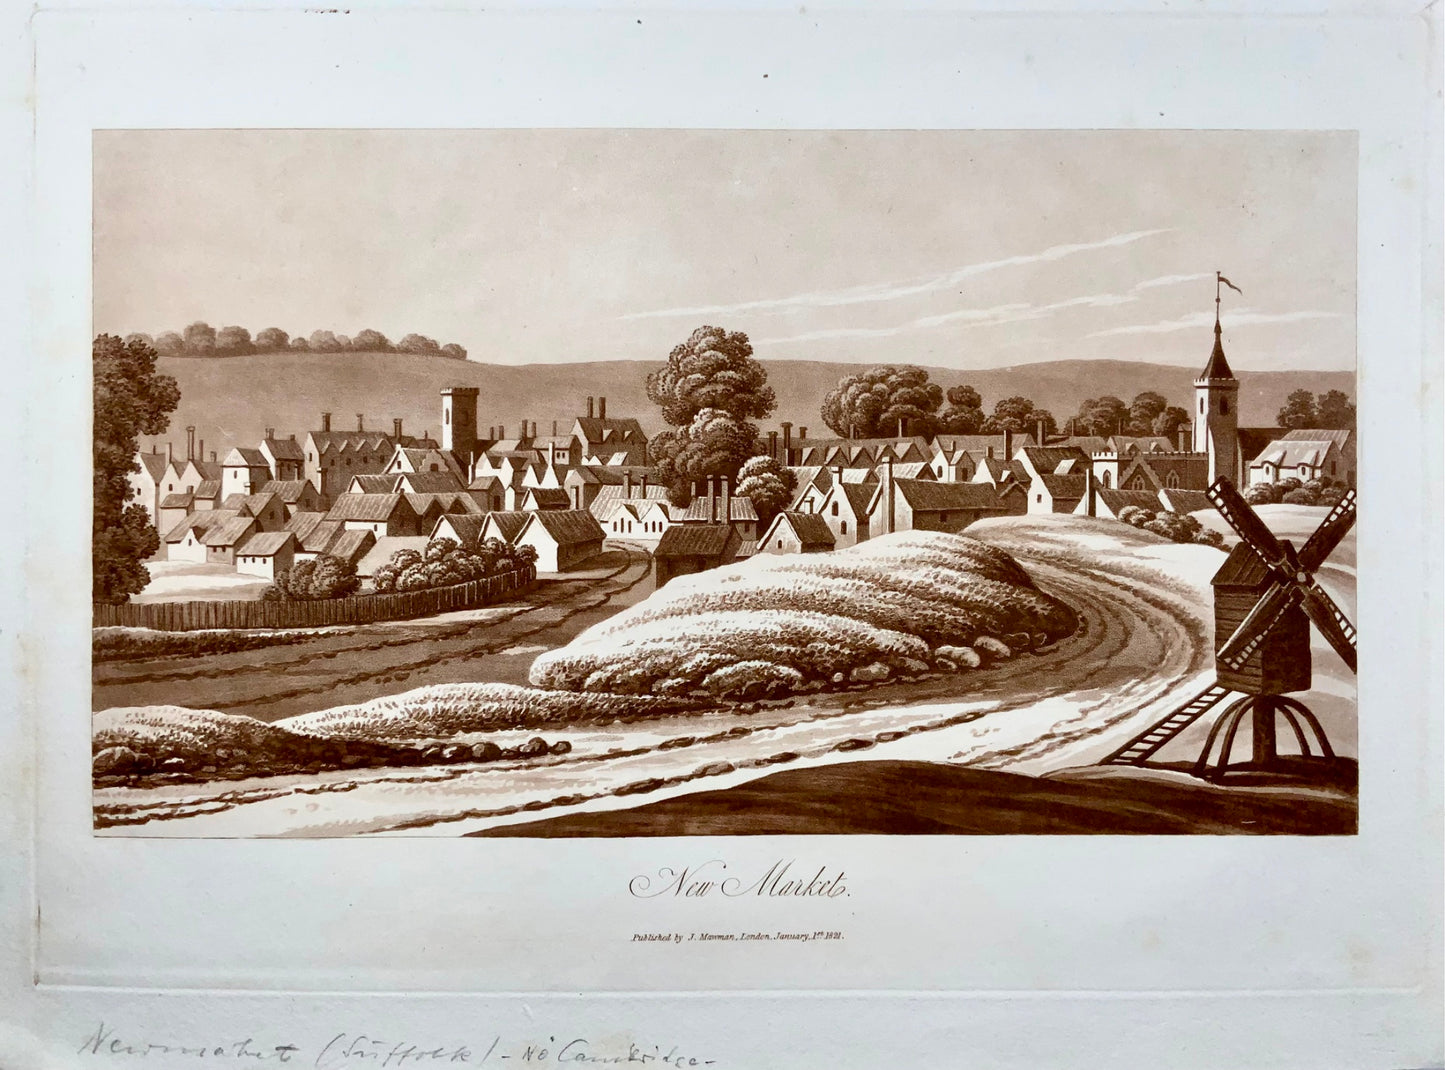 1821 Newmarket, Cambridgeshire, Sepia aquatint by Mawman after Shepherd, topography, travel